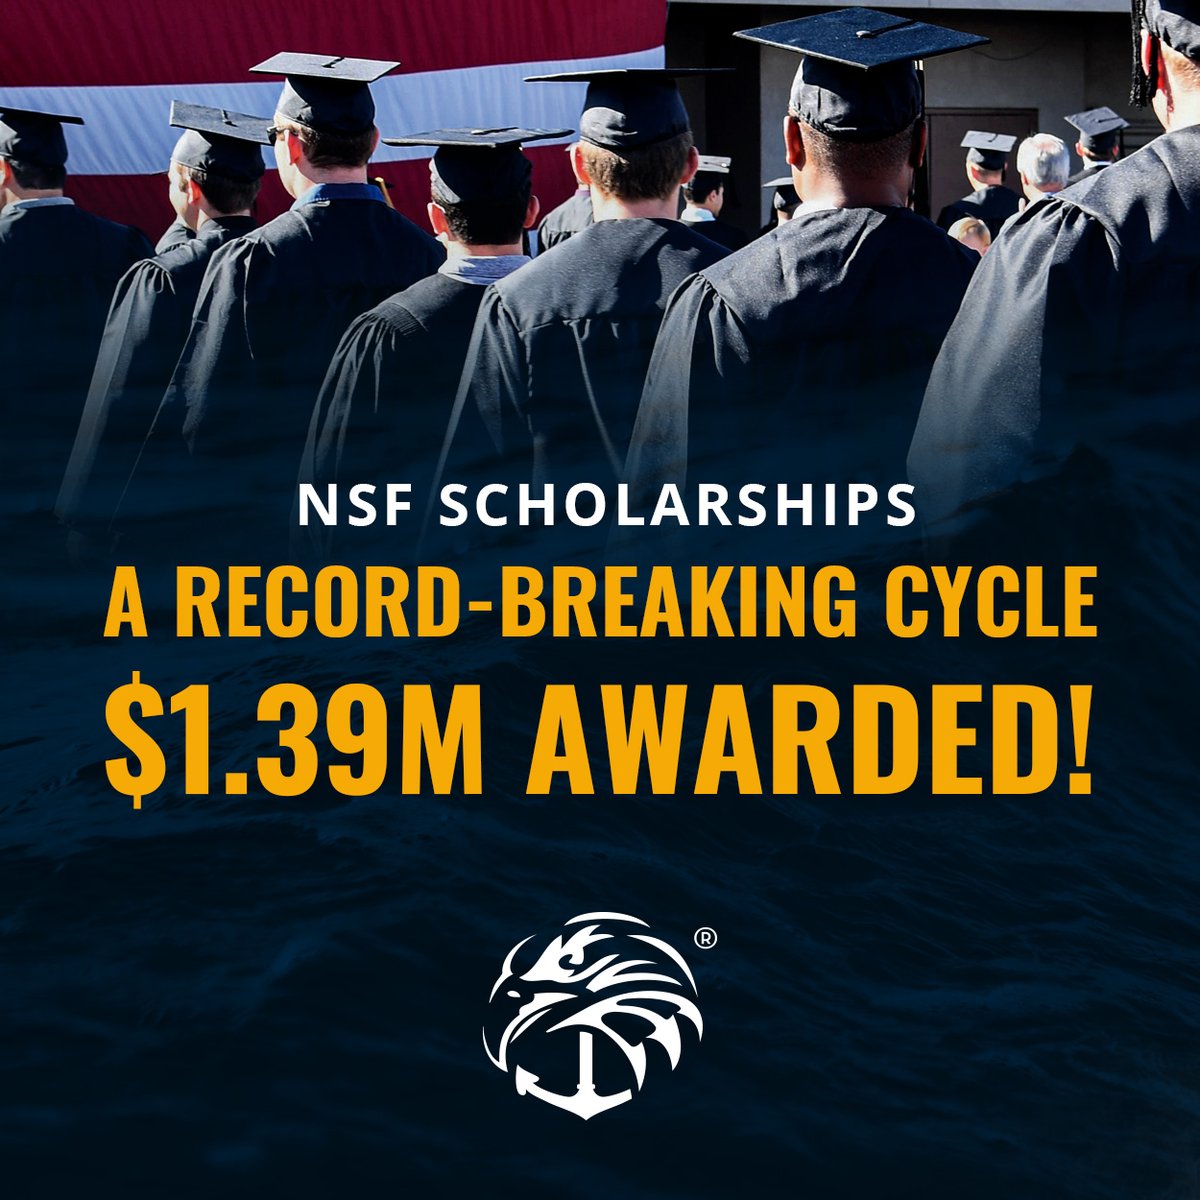 Powered by our incredible donors, we’re excited to share that NSF has awarded a total of $1,394,000 to 469 deserving applicants. We experienced a surge in applications, including a 20% increase from dependents and a 14% increase from veterans.